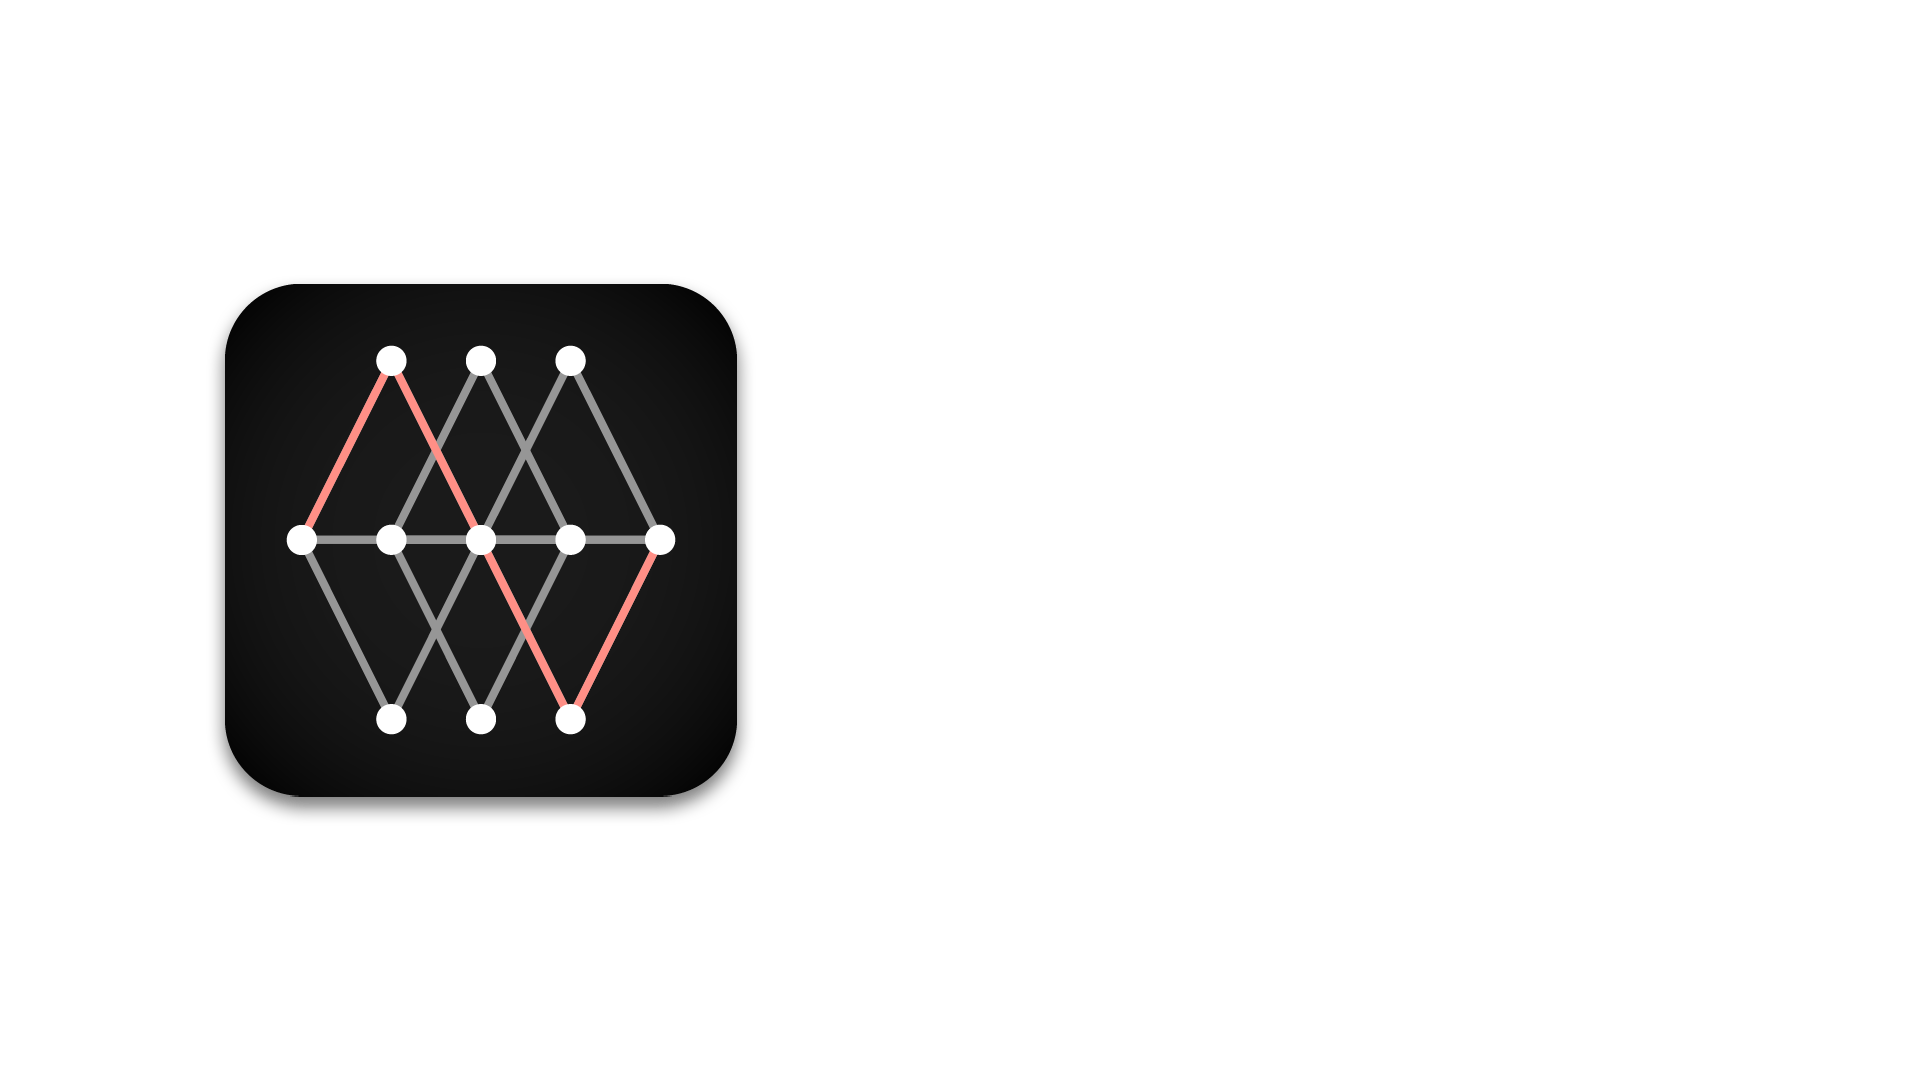 Euler - Connect the dots